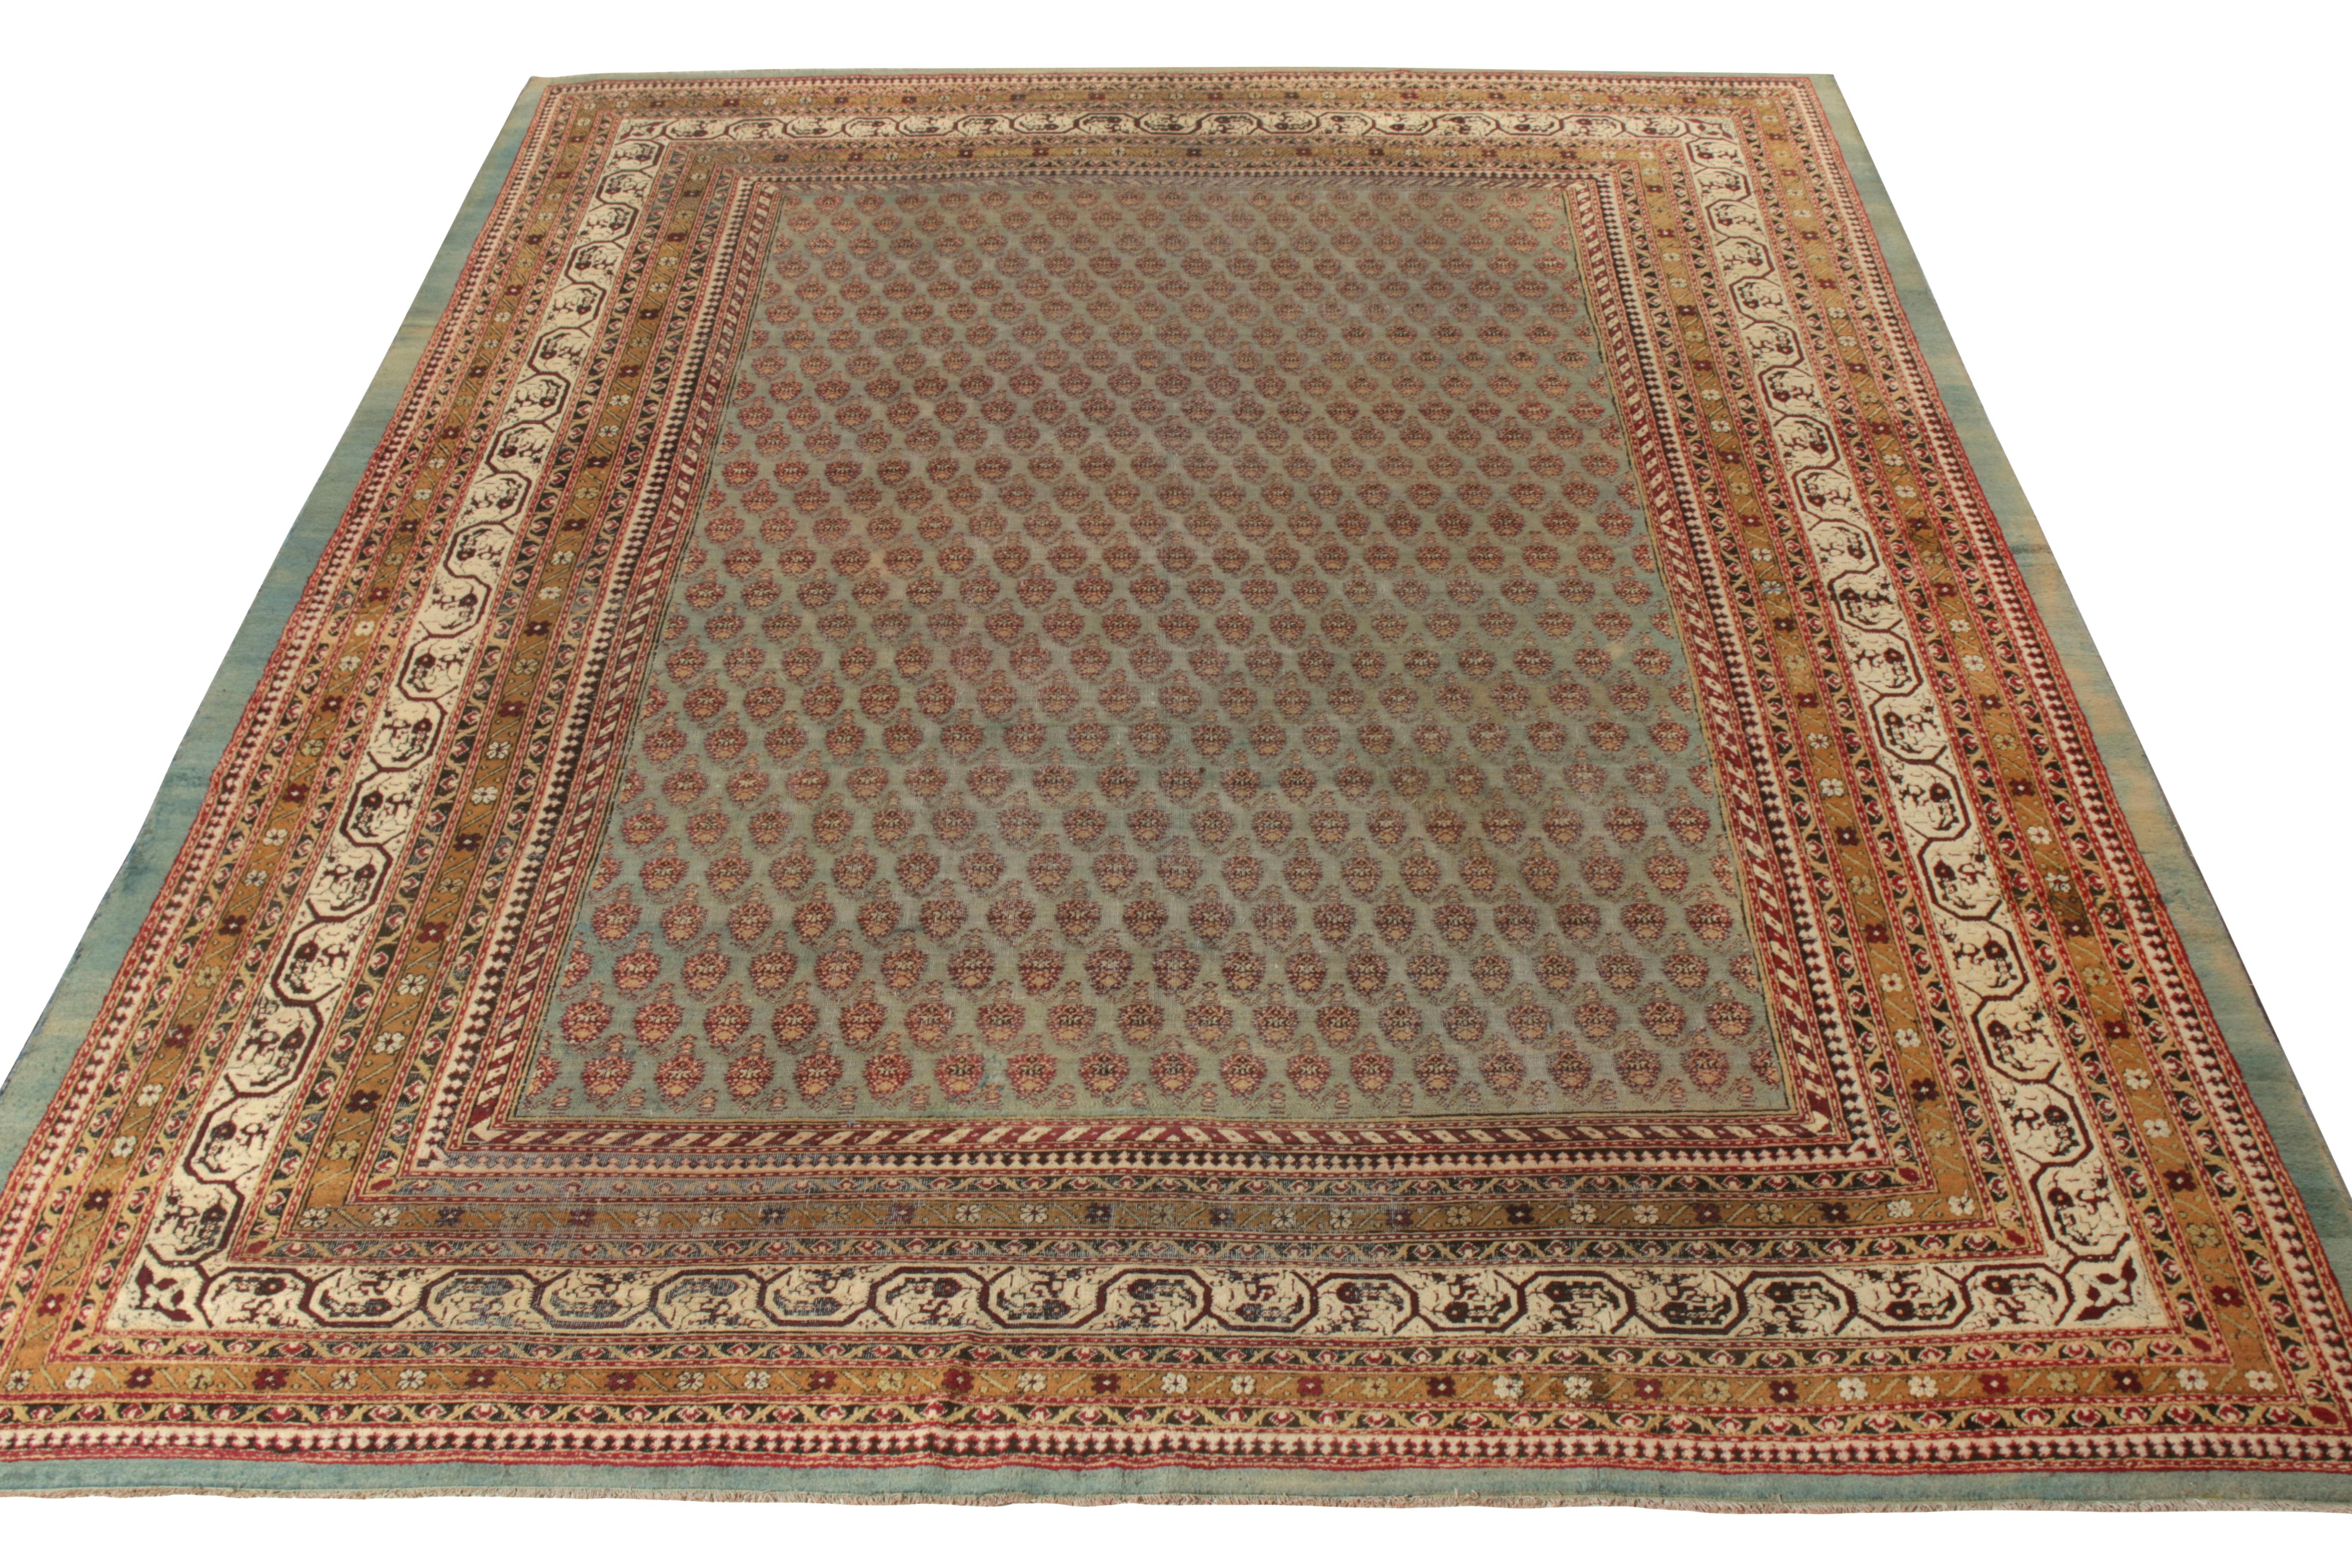 Hand knotted in fine quality wool, this antique 9x12 Amritsar rug originates from India circa 1920-1930. Enjoying the classic sensibilities of the finest Indian workshops, the rug displays an exemplary show of floral imagination that expresses